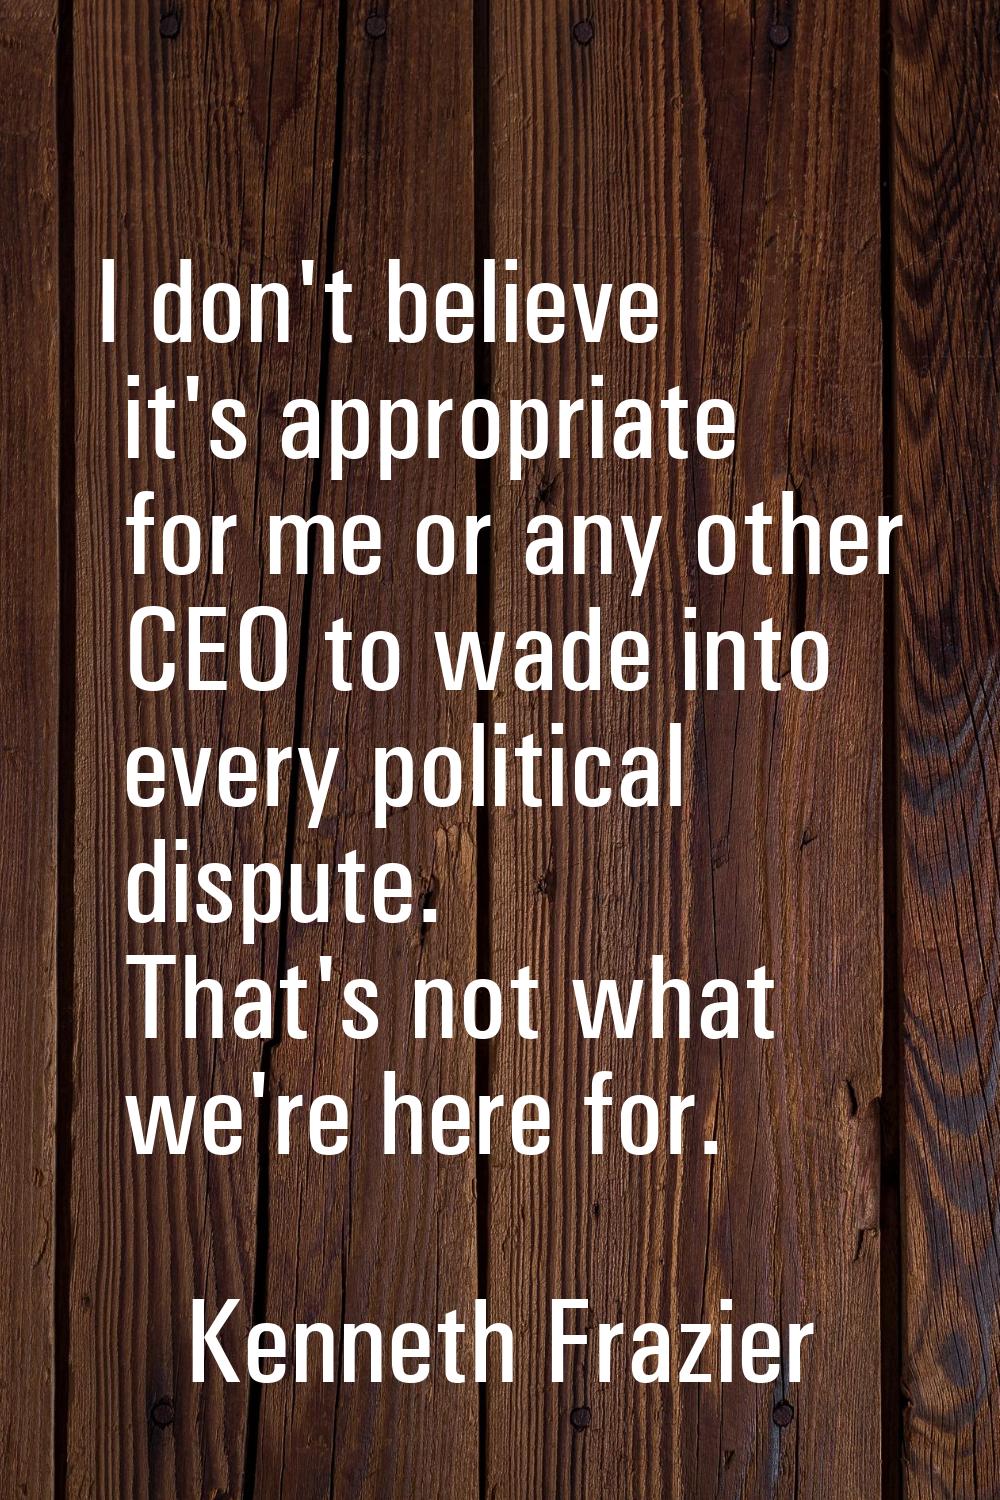 I don't believe it's appropriate for me or any other CEO to wade into every political dispute. That